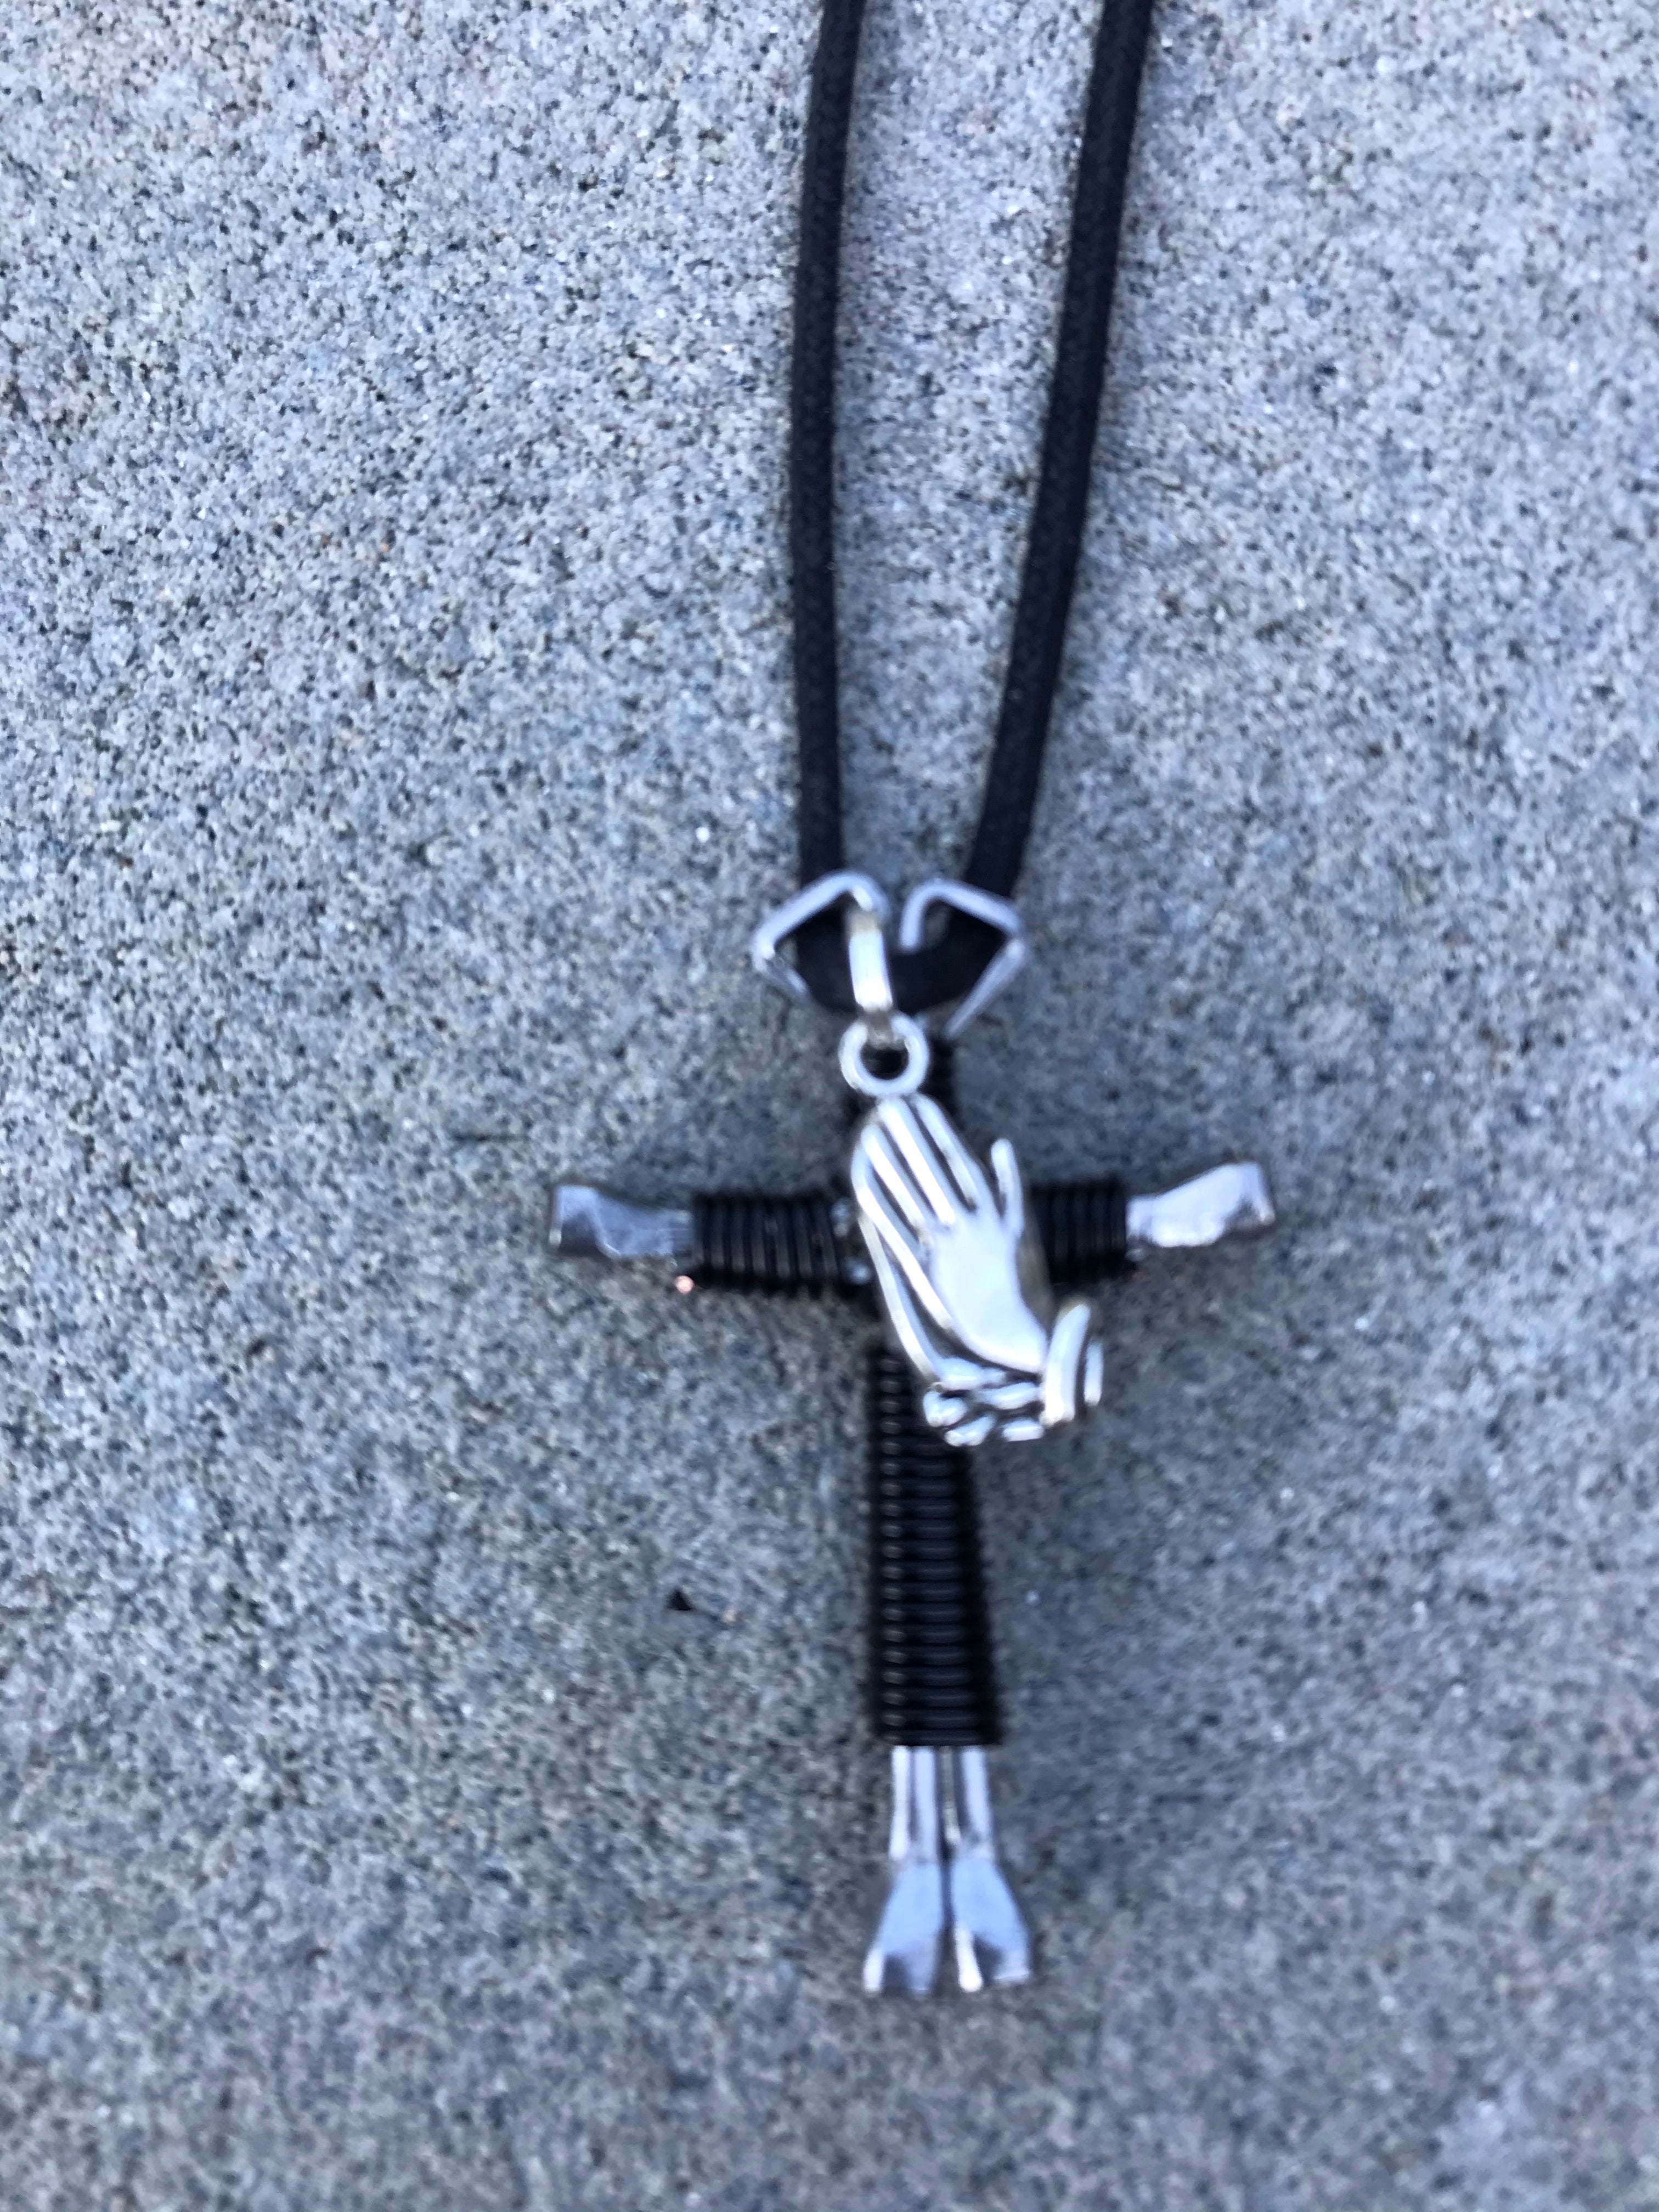 Black Cross Necklace with Praying Hands Charm Handmade of 4 Horseshoe Nails